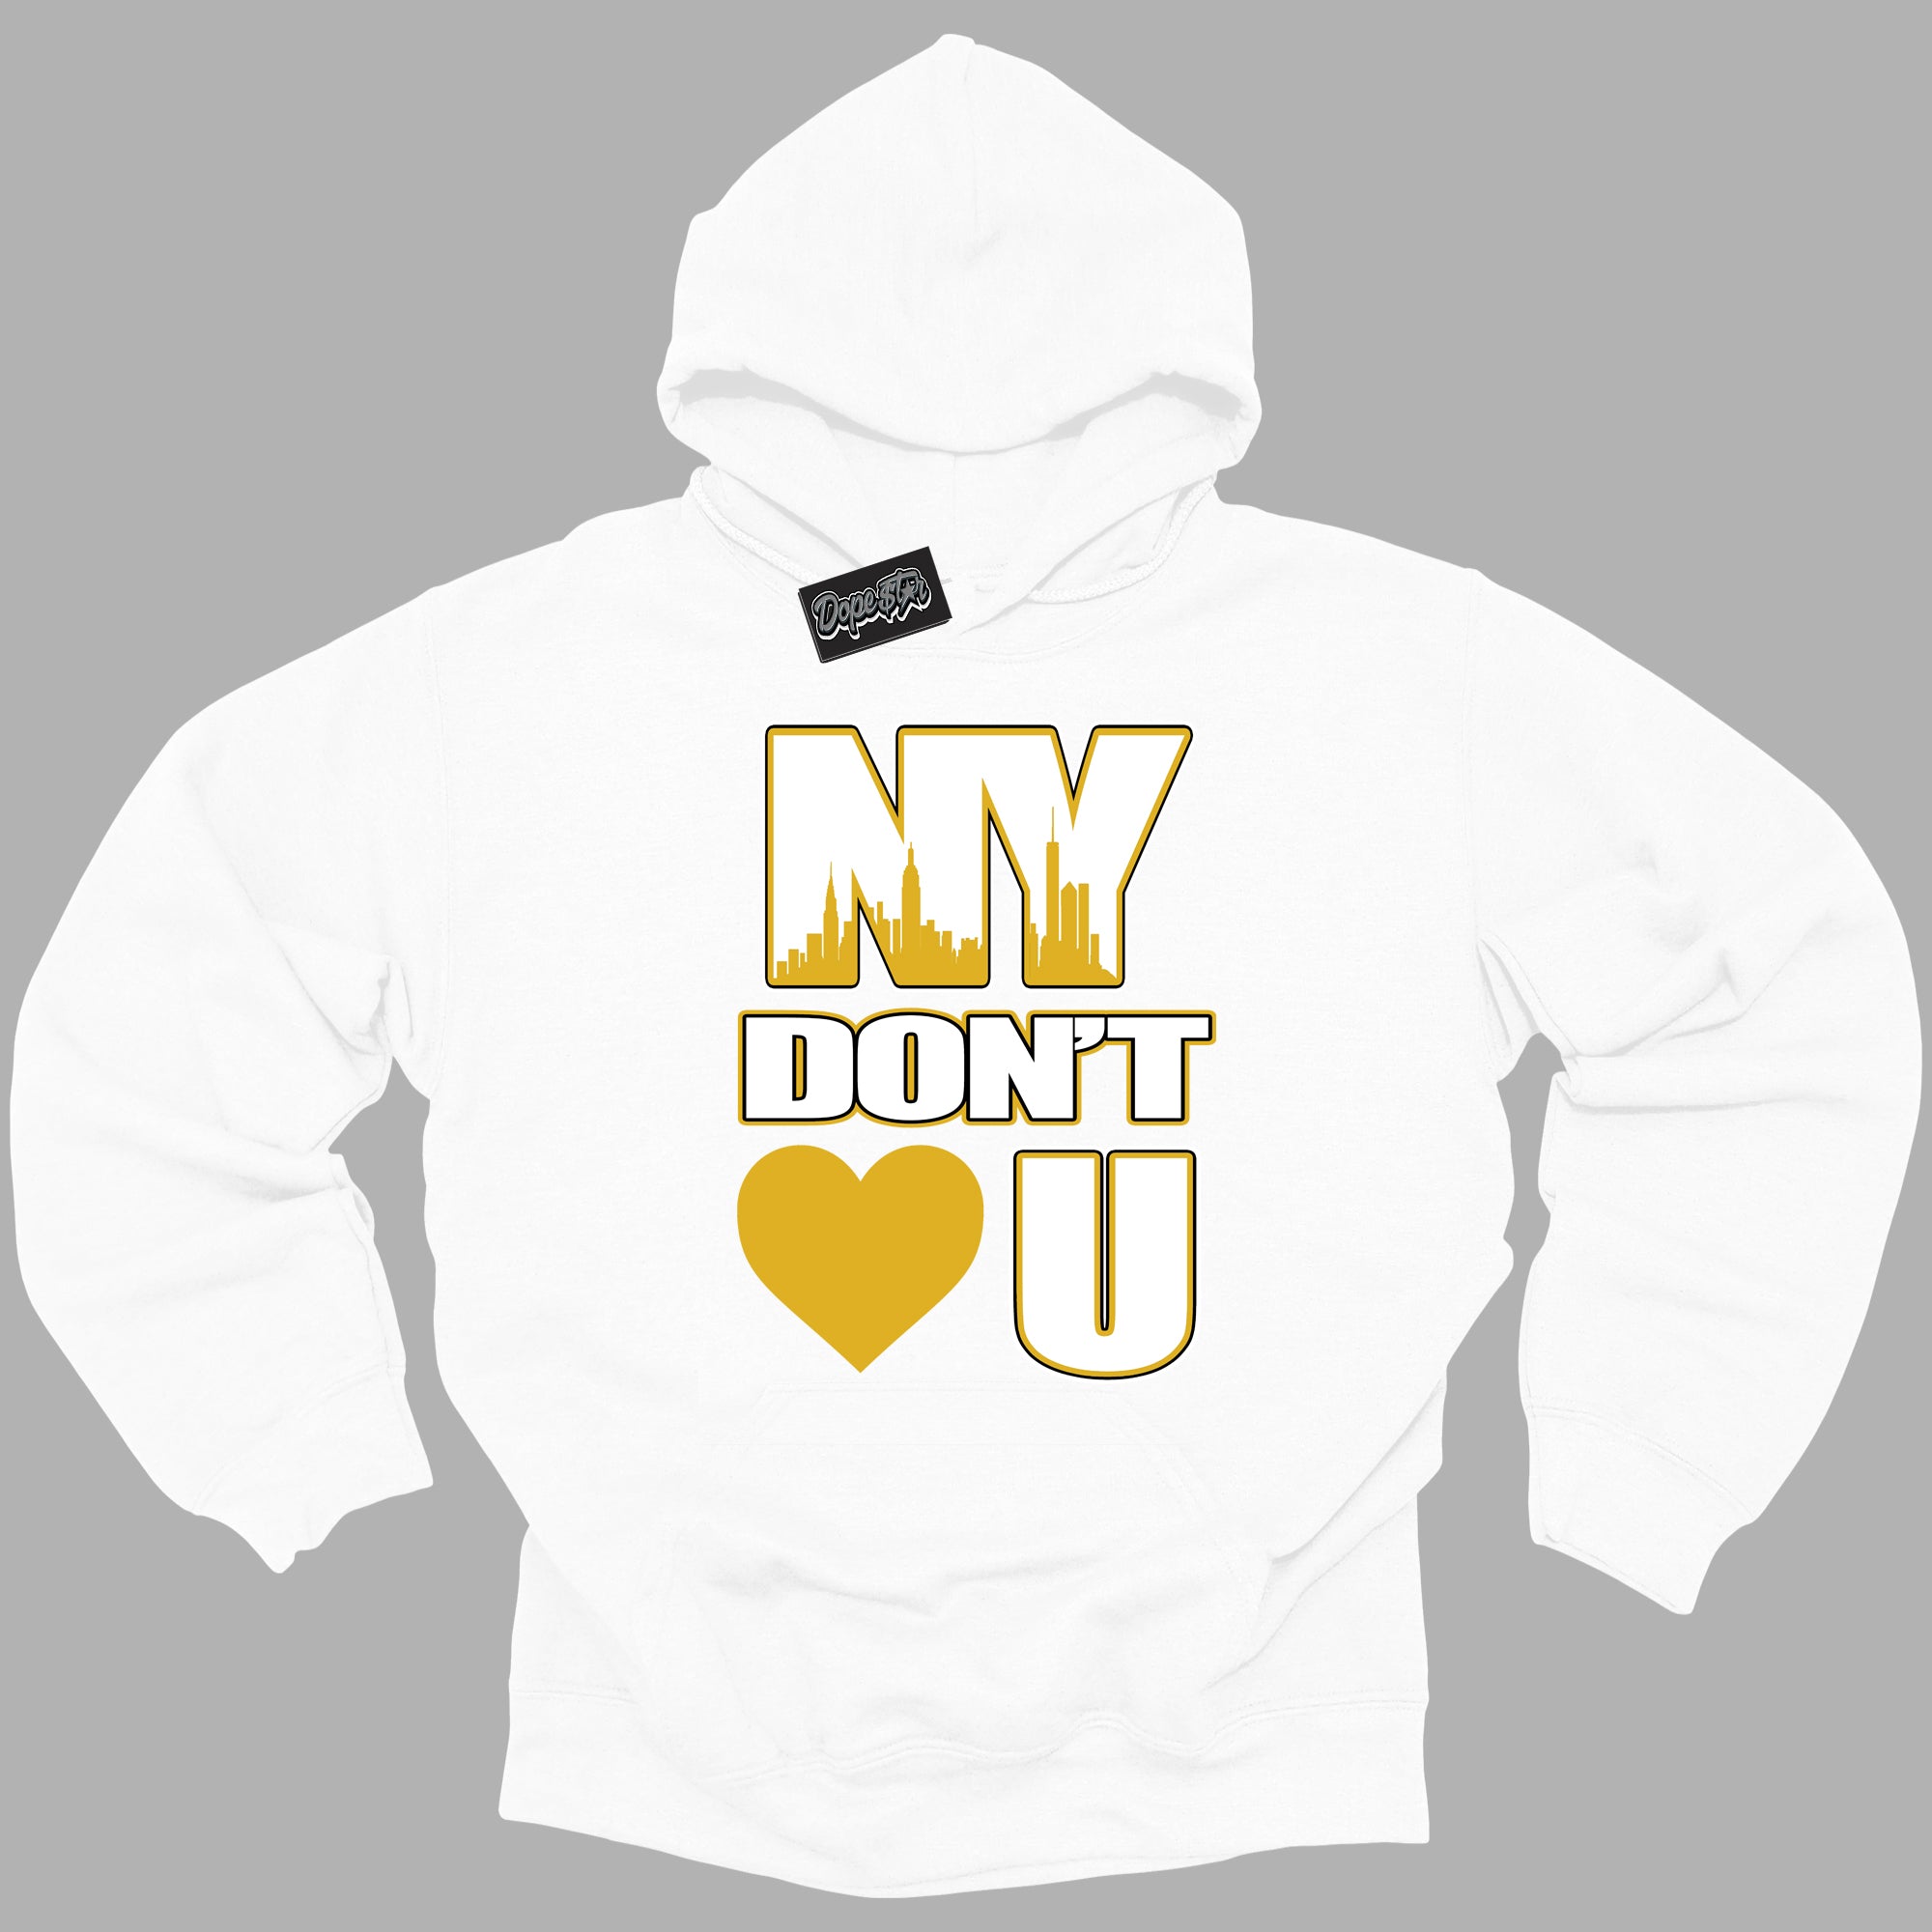 Cool White Hoodie with “ NY Don't Love You ”  design that Perfectly Matches Yellow Ochre 6s Sneakers.